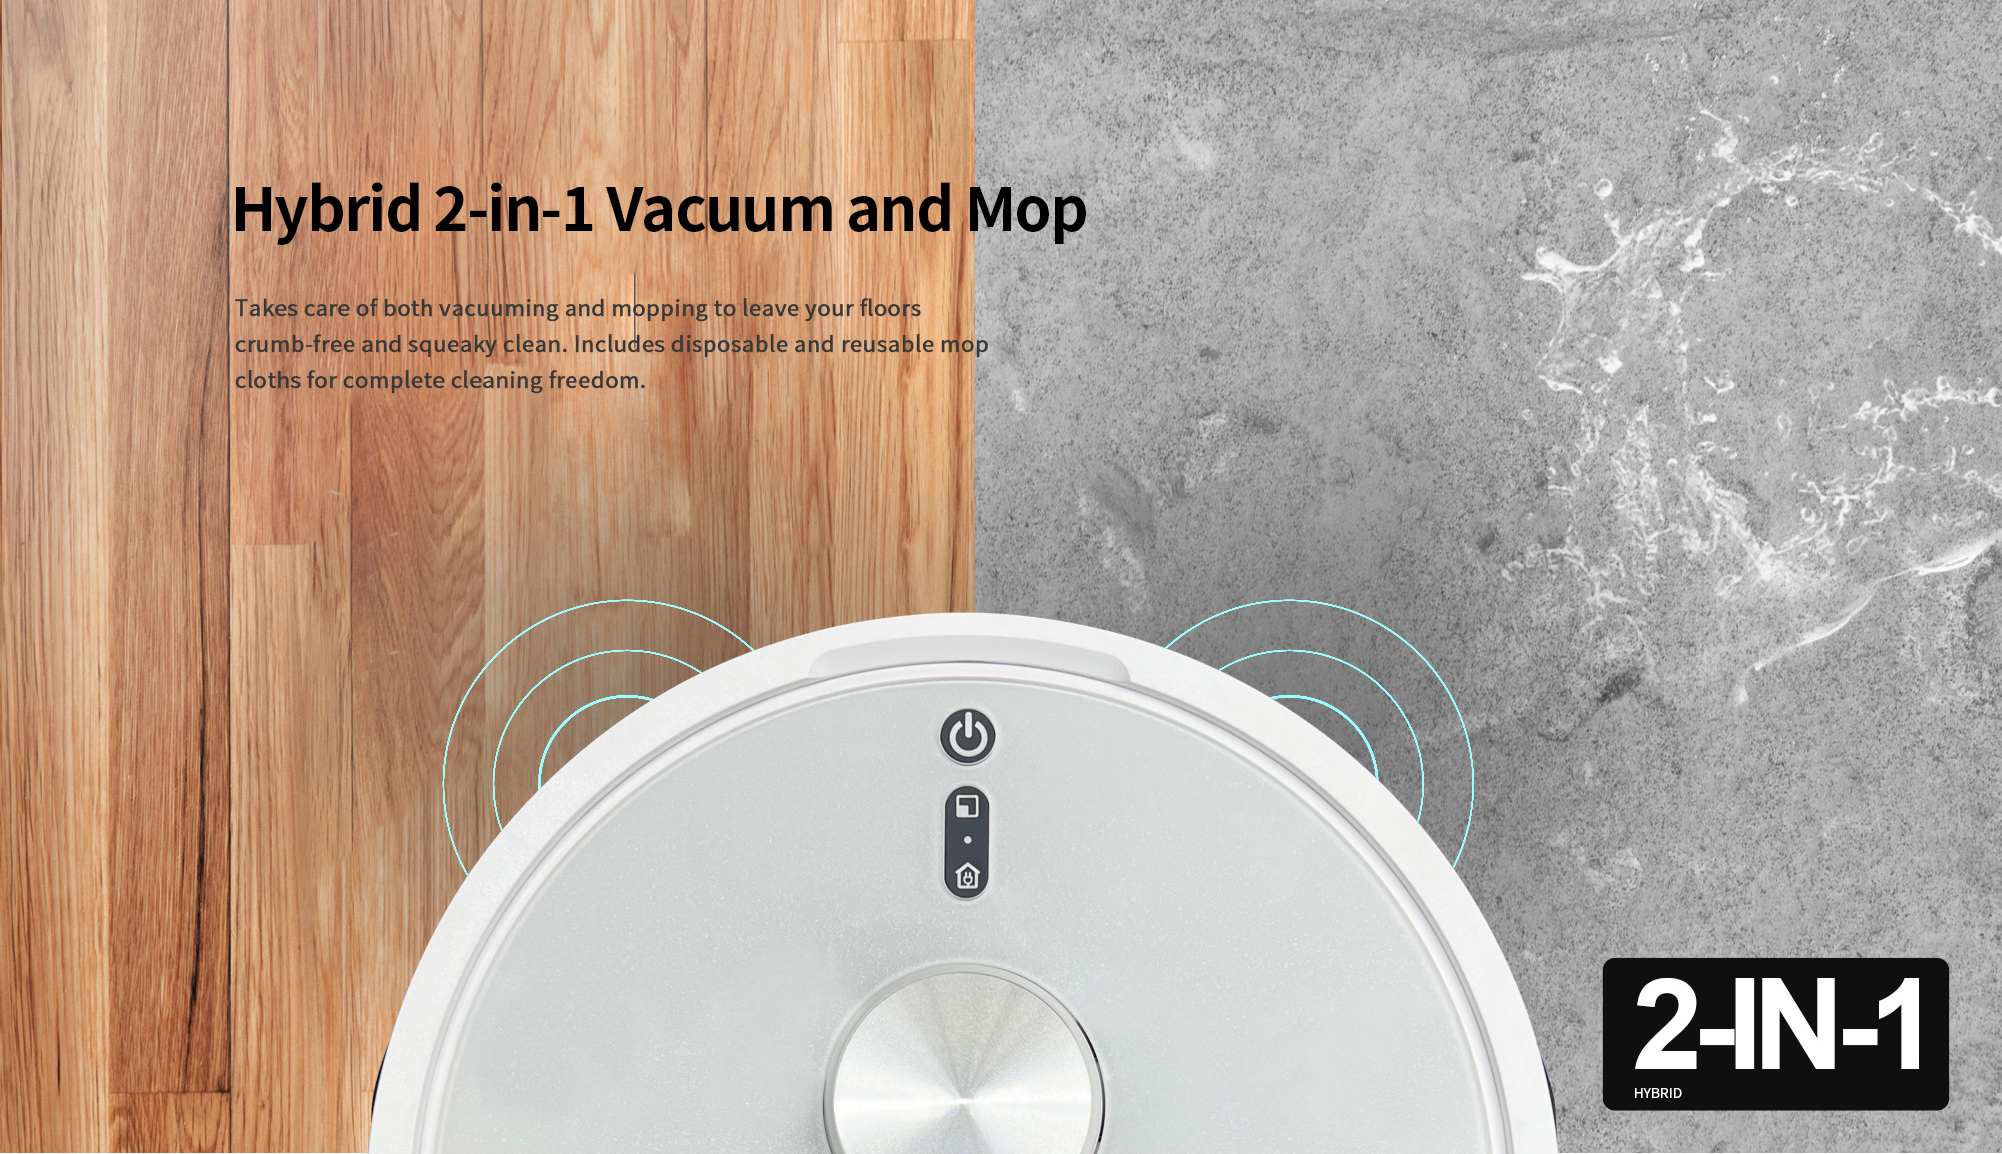 Smart-Home-Appliances-Robot-Vacuum-and-Mop-Combo-Seedream-SM10191-WiFi-App-Robotic-Vacuum-Cleaner-with-Schedule-2-in-1-Mopping-Robot-Vacuum-with-Watertank-and-Dustbin-34